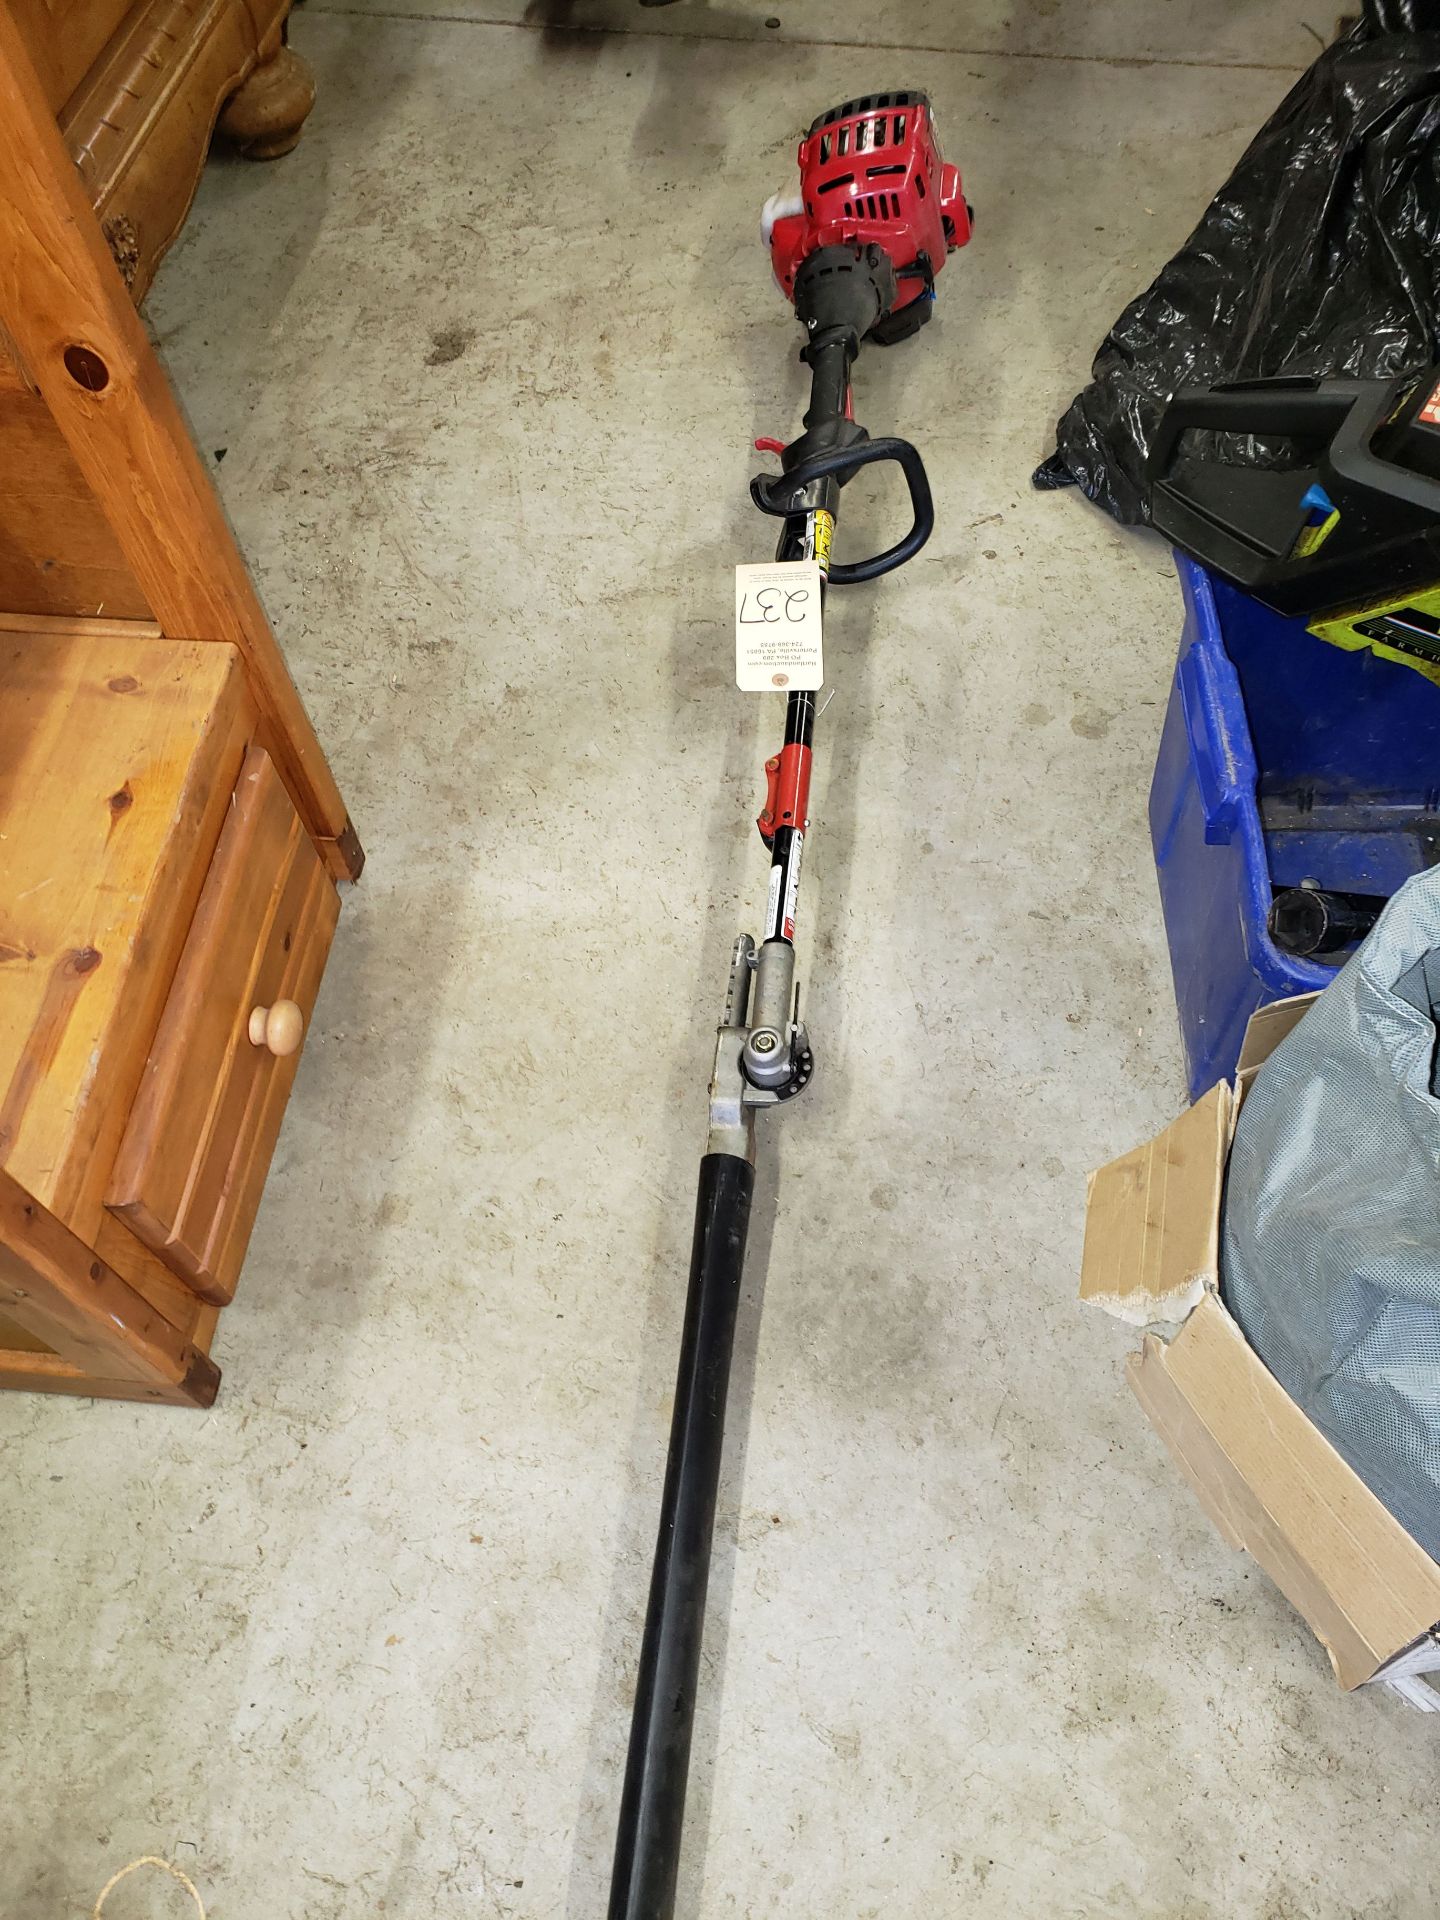 TROYBILT TB22 WITH HEDGE TRIMMER ATTACHMENT